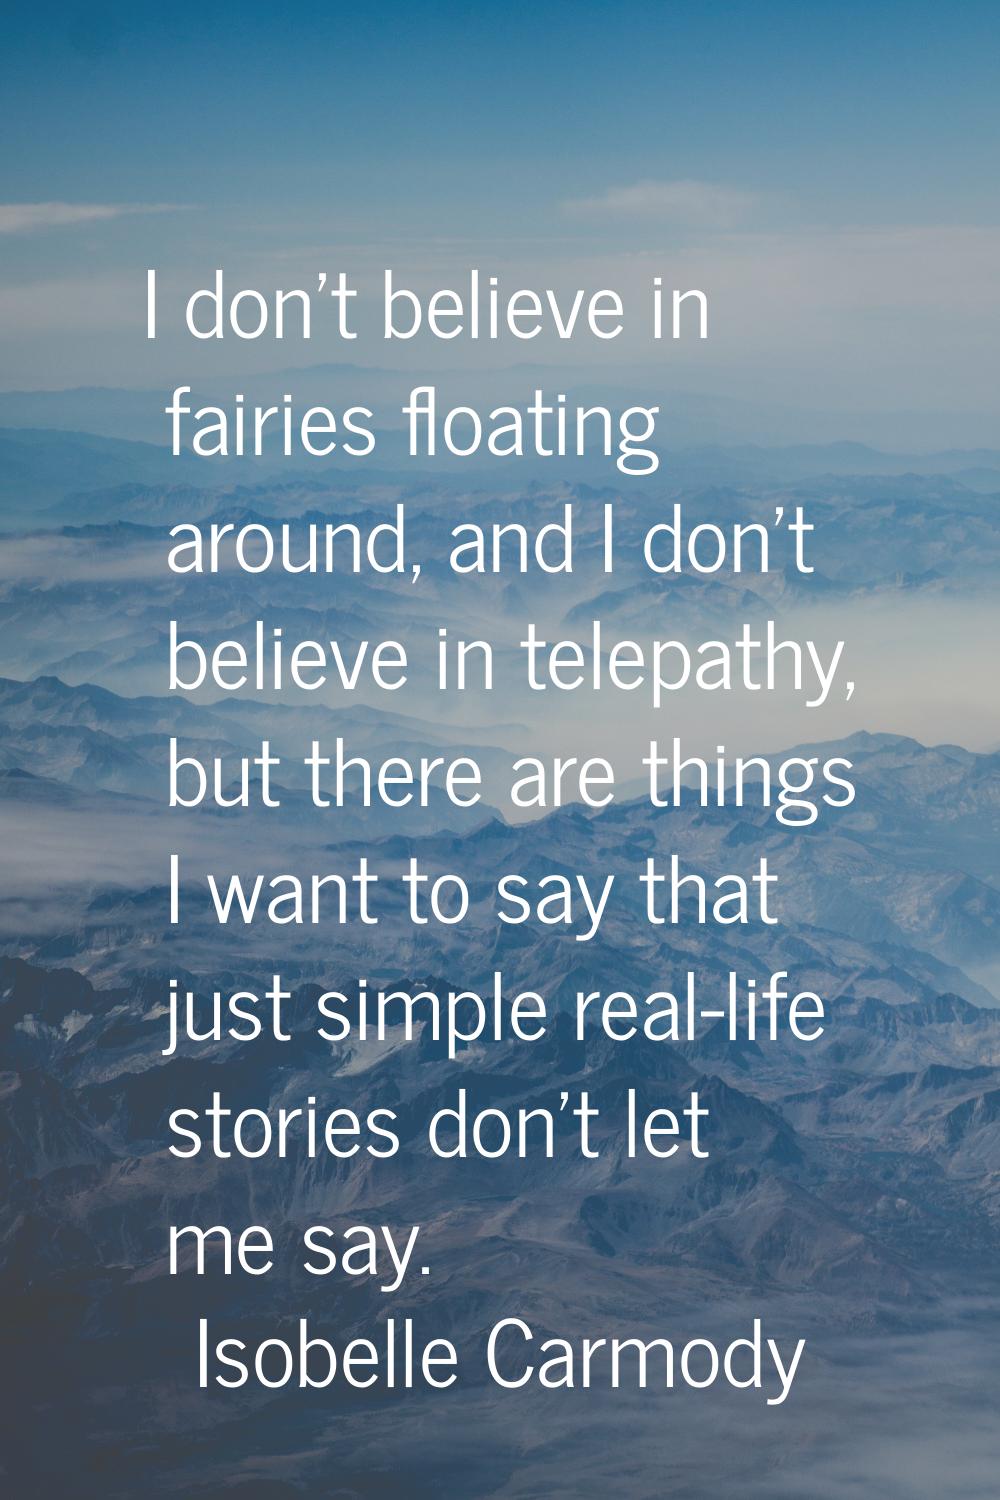 I don't believe in fairies floating around, and I don't believe in telepathy, but there are things 